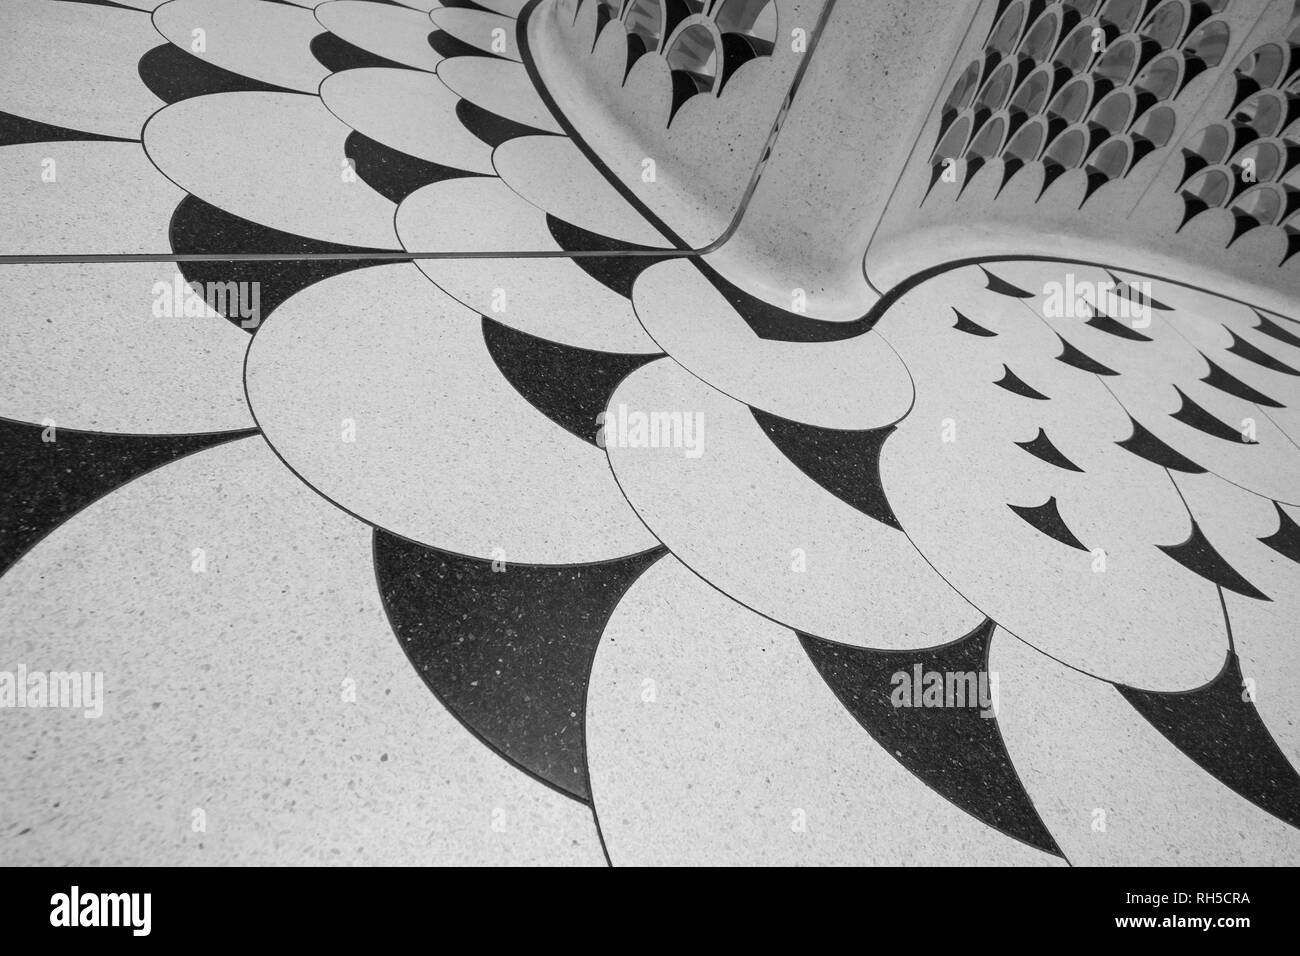 Detailed view of the spiral staircase and terrazzo floor around it, at Tate Britain art gallery on Millbank, London UK. Photographed in monochrome. Stock Photo